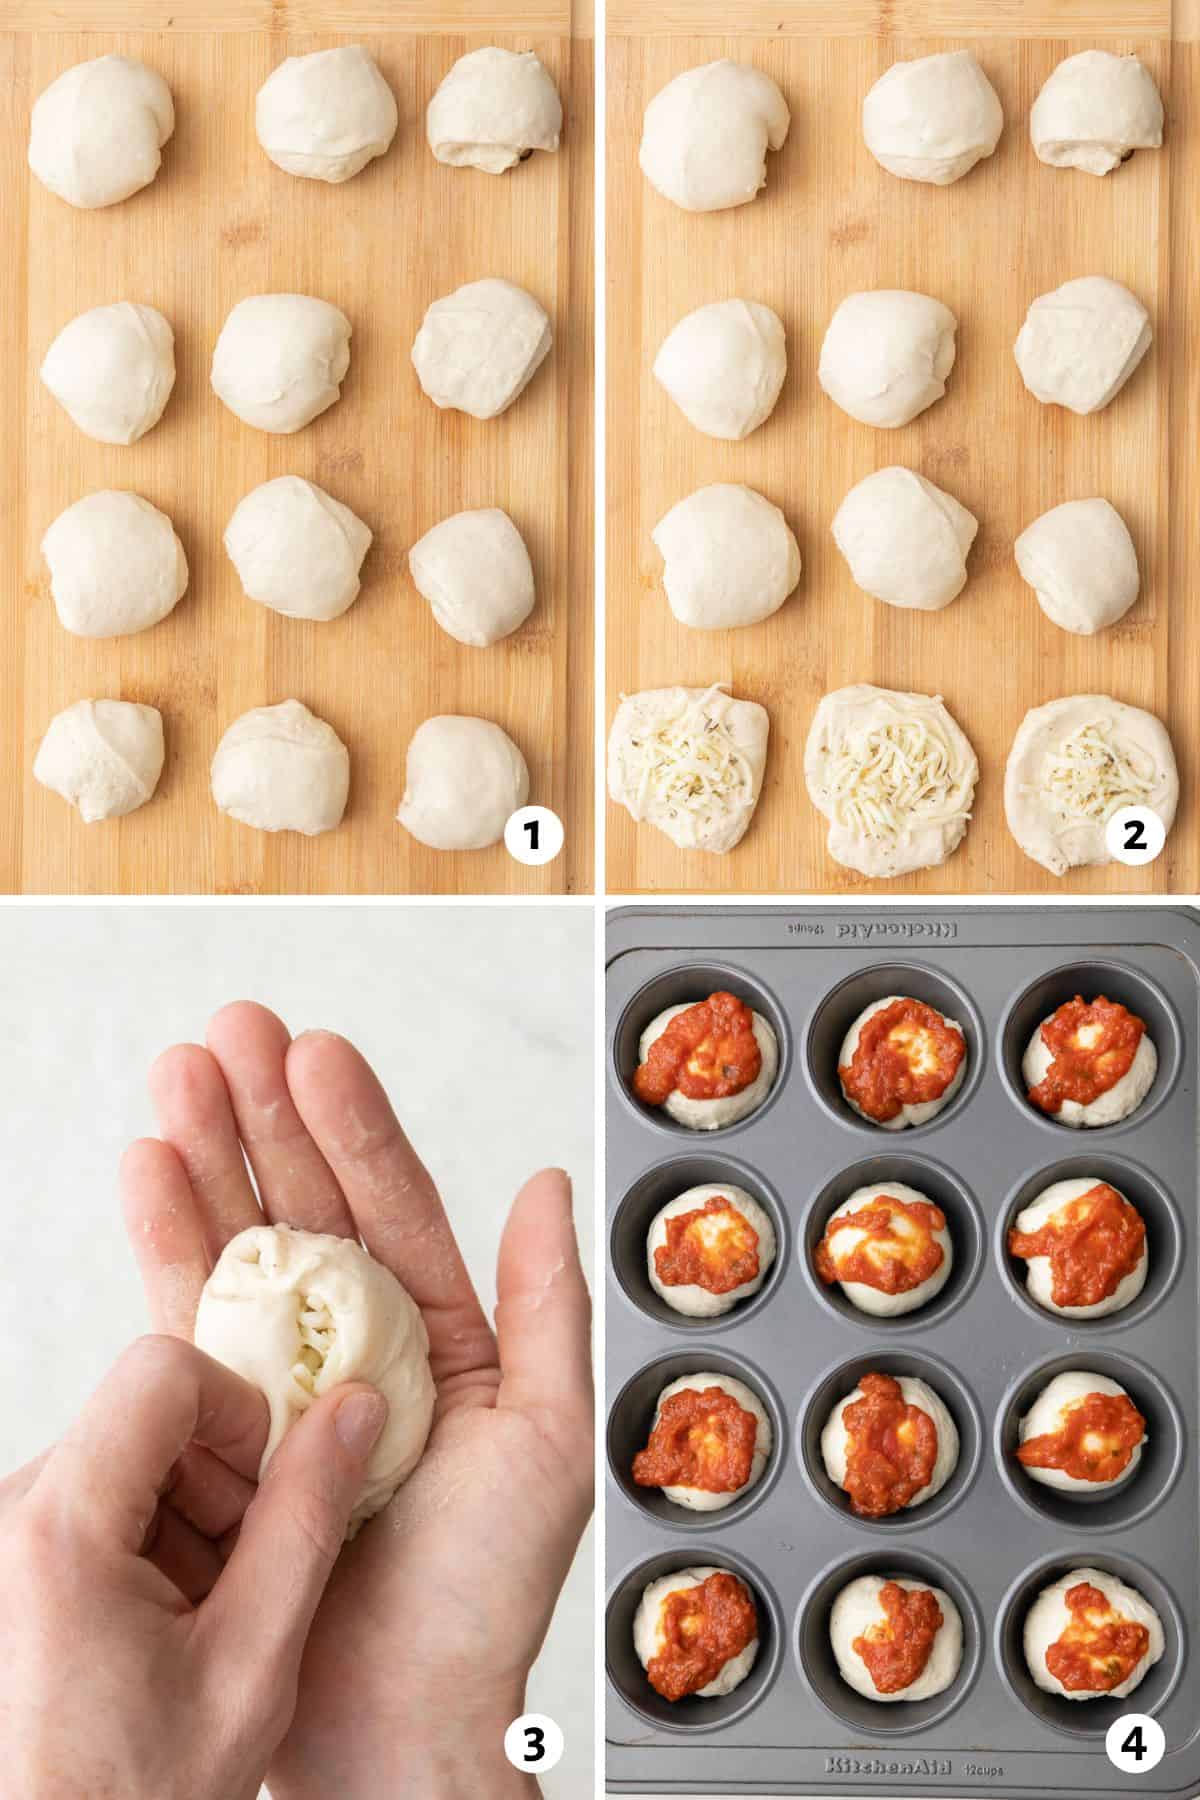 4 image collage making recipe: 1- pizza dough cut into 12 portions, 2- some flattened out and filled with cheese, 3- hand pinching sides of dough around cheese, 4- stuffed pizza dough in a muffin tin with sauce on top.